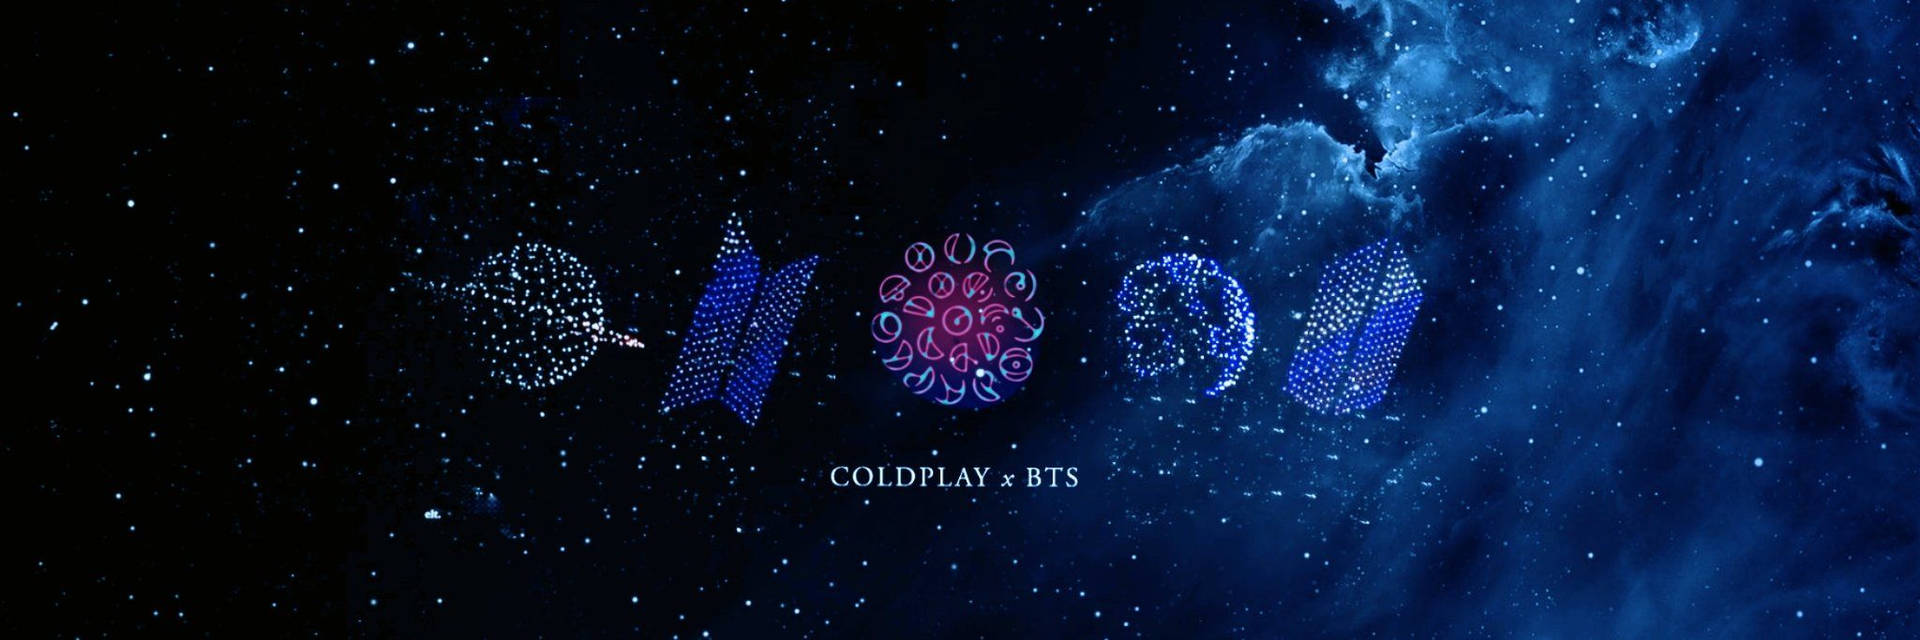 Coldplay And Bts With Stars Twitter Header Wallpaper